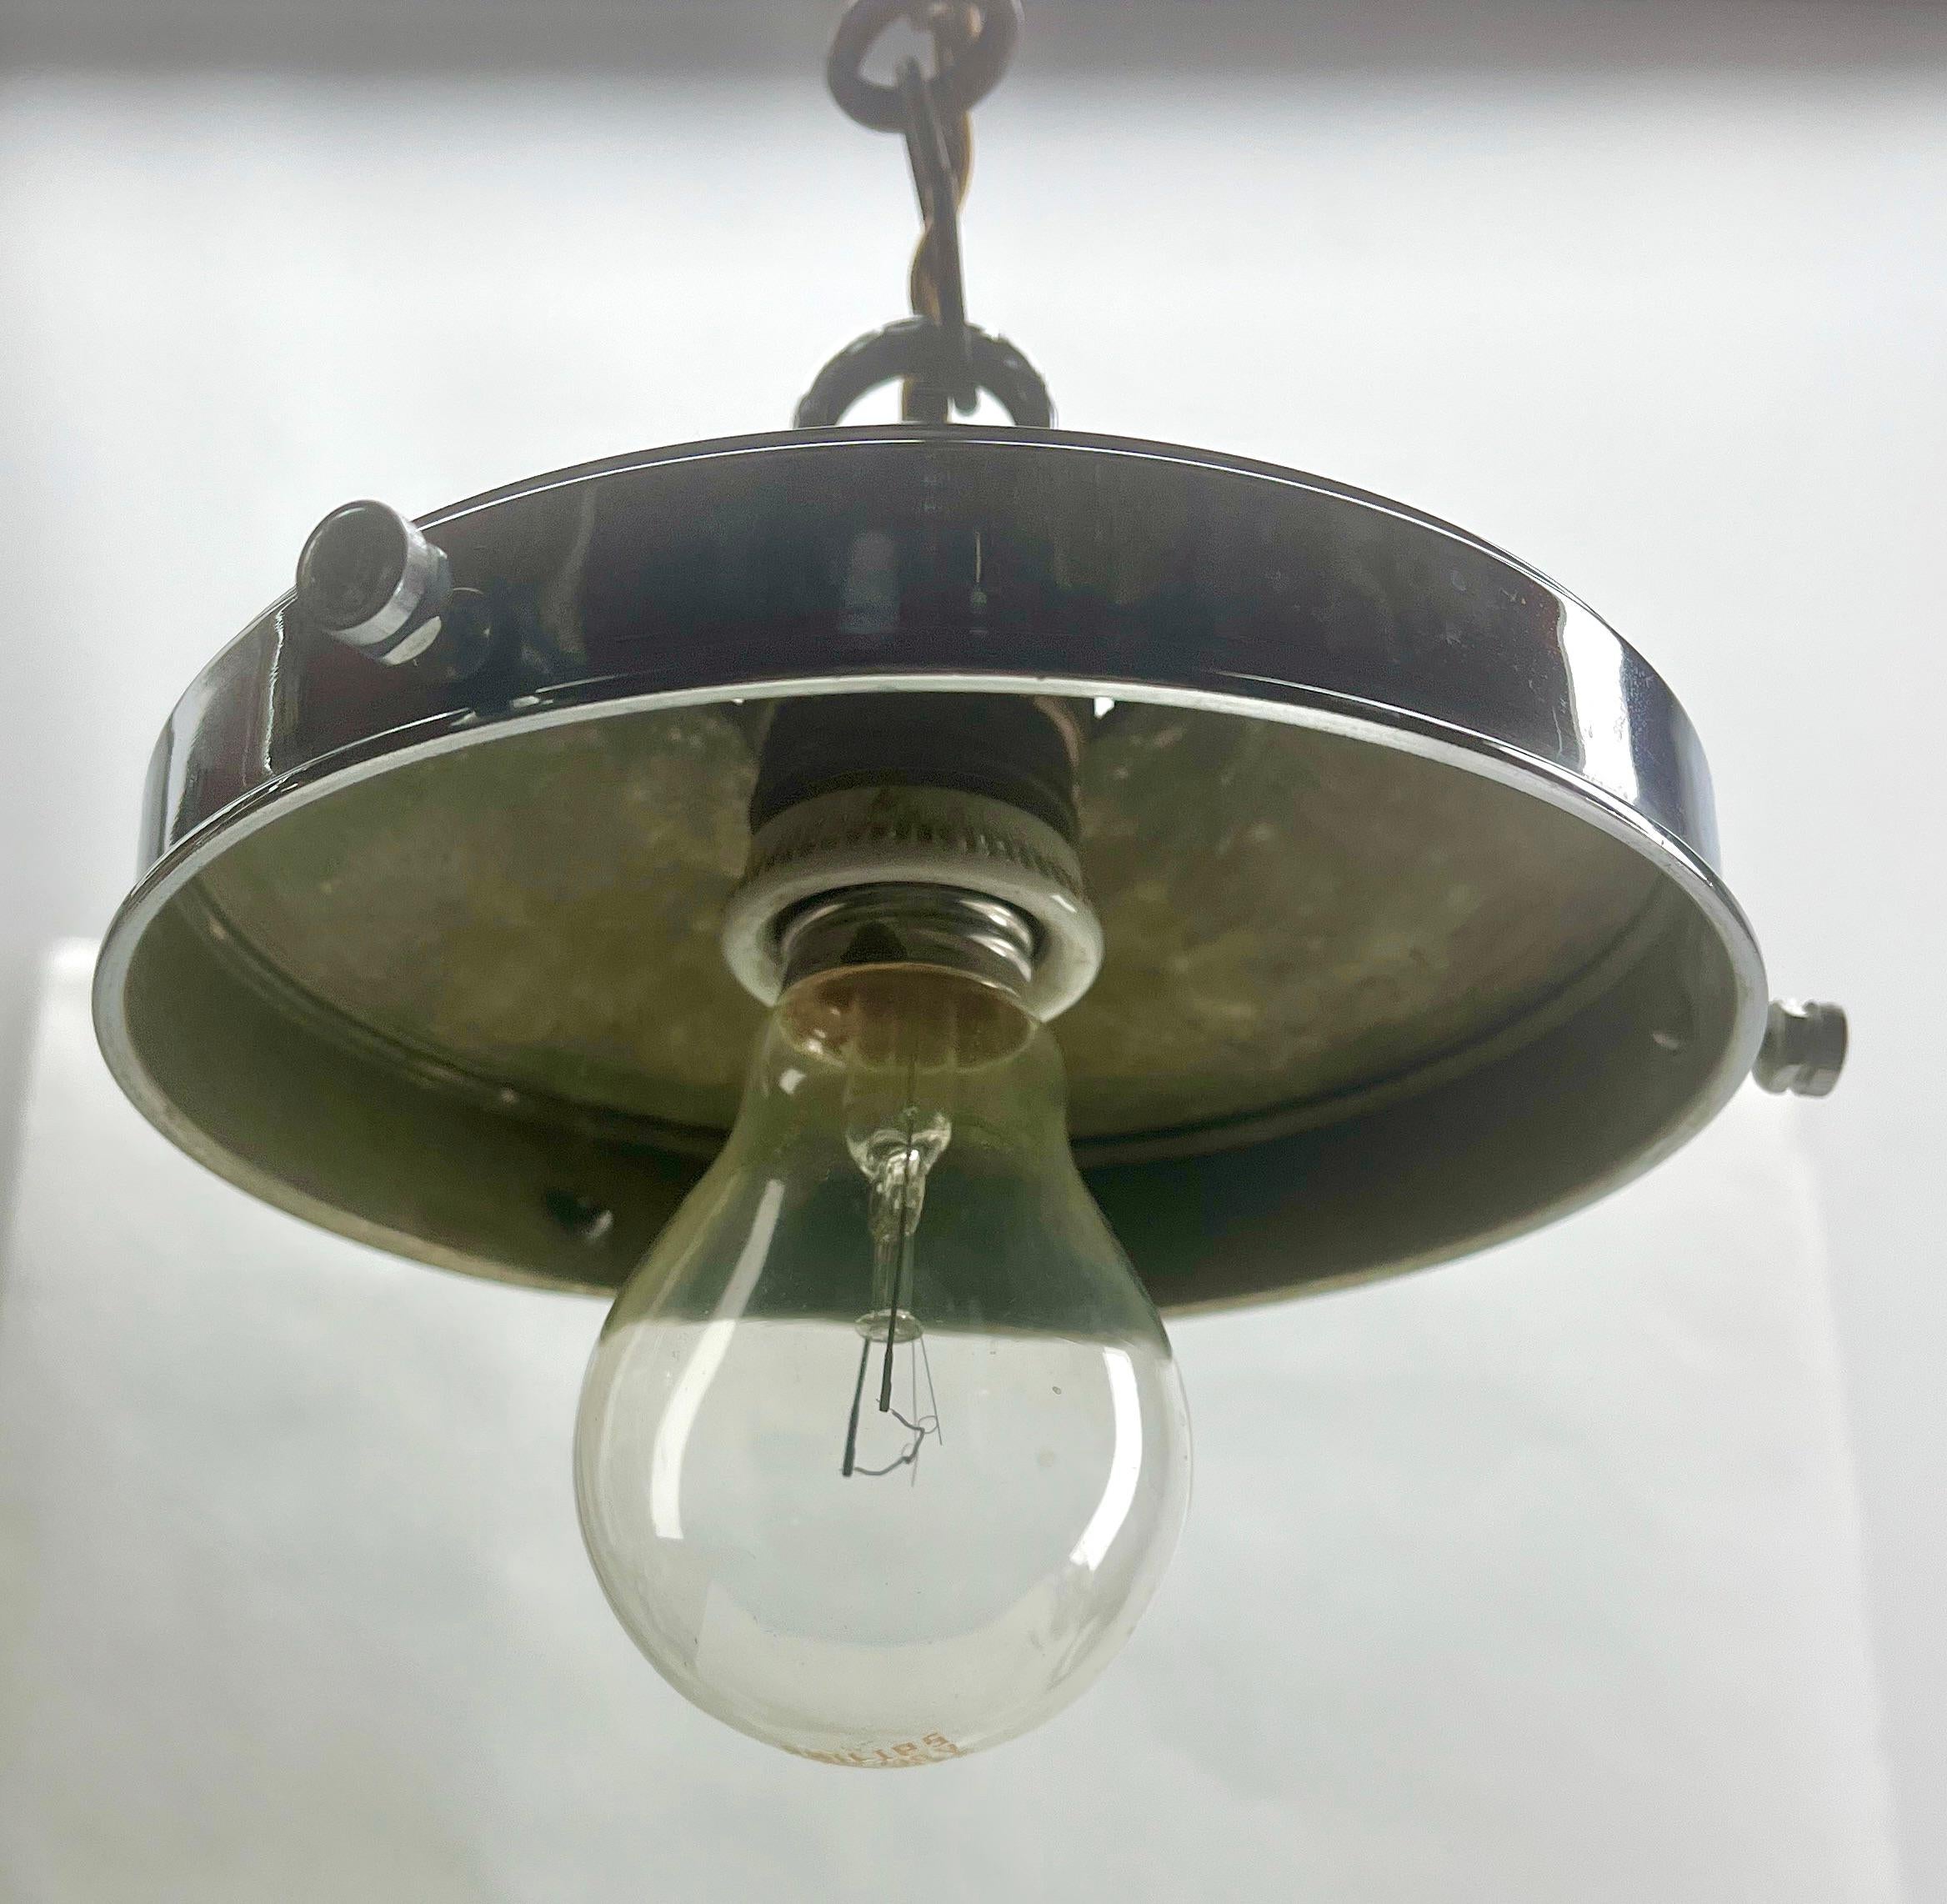 Phillips Pendant Lamp with a Opaline Shade and Chrome Fittings, 1930s, Holland In Good Condition For Sale In Verviers, BE